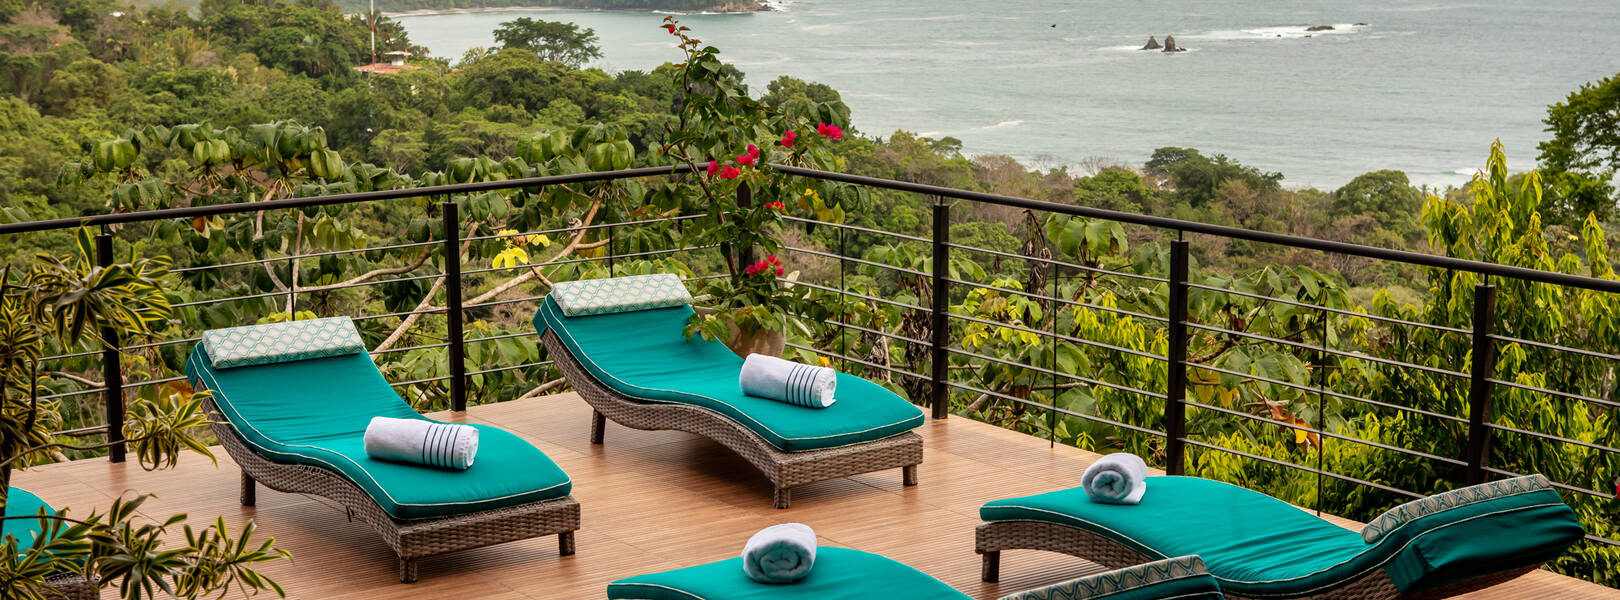 Exquisite, luxurious loungers are strategically positioned to bask in the sun while reveling in the awe-inspiring view.